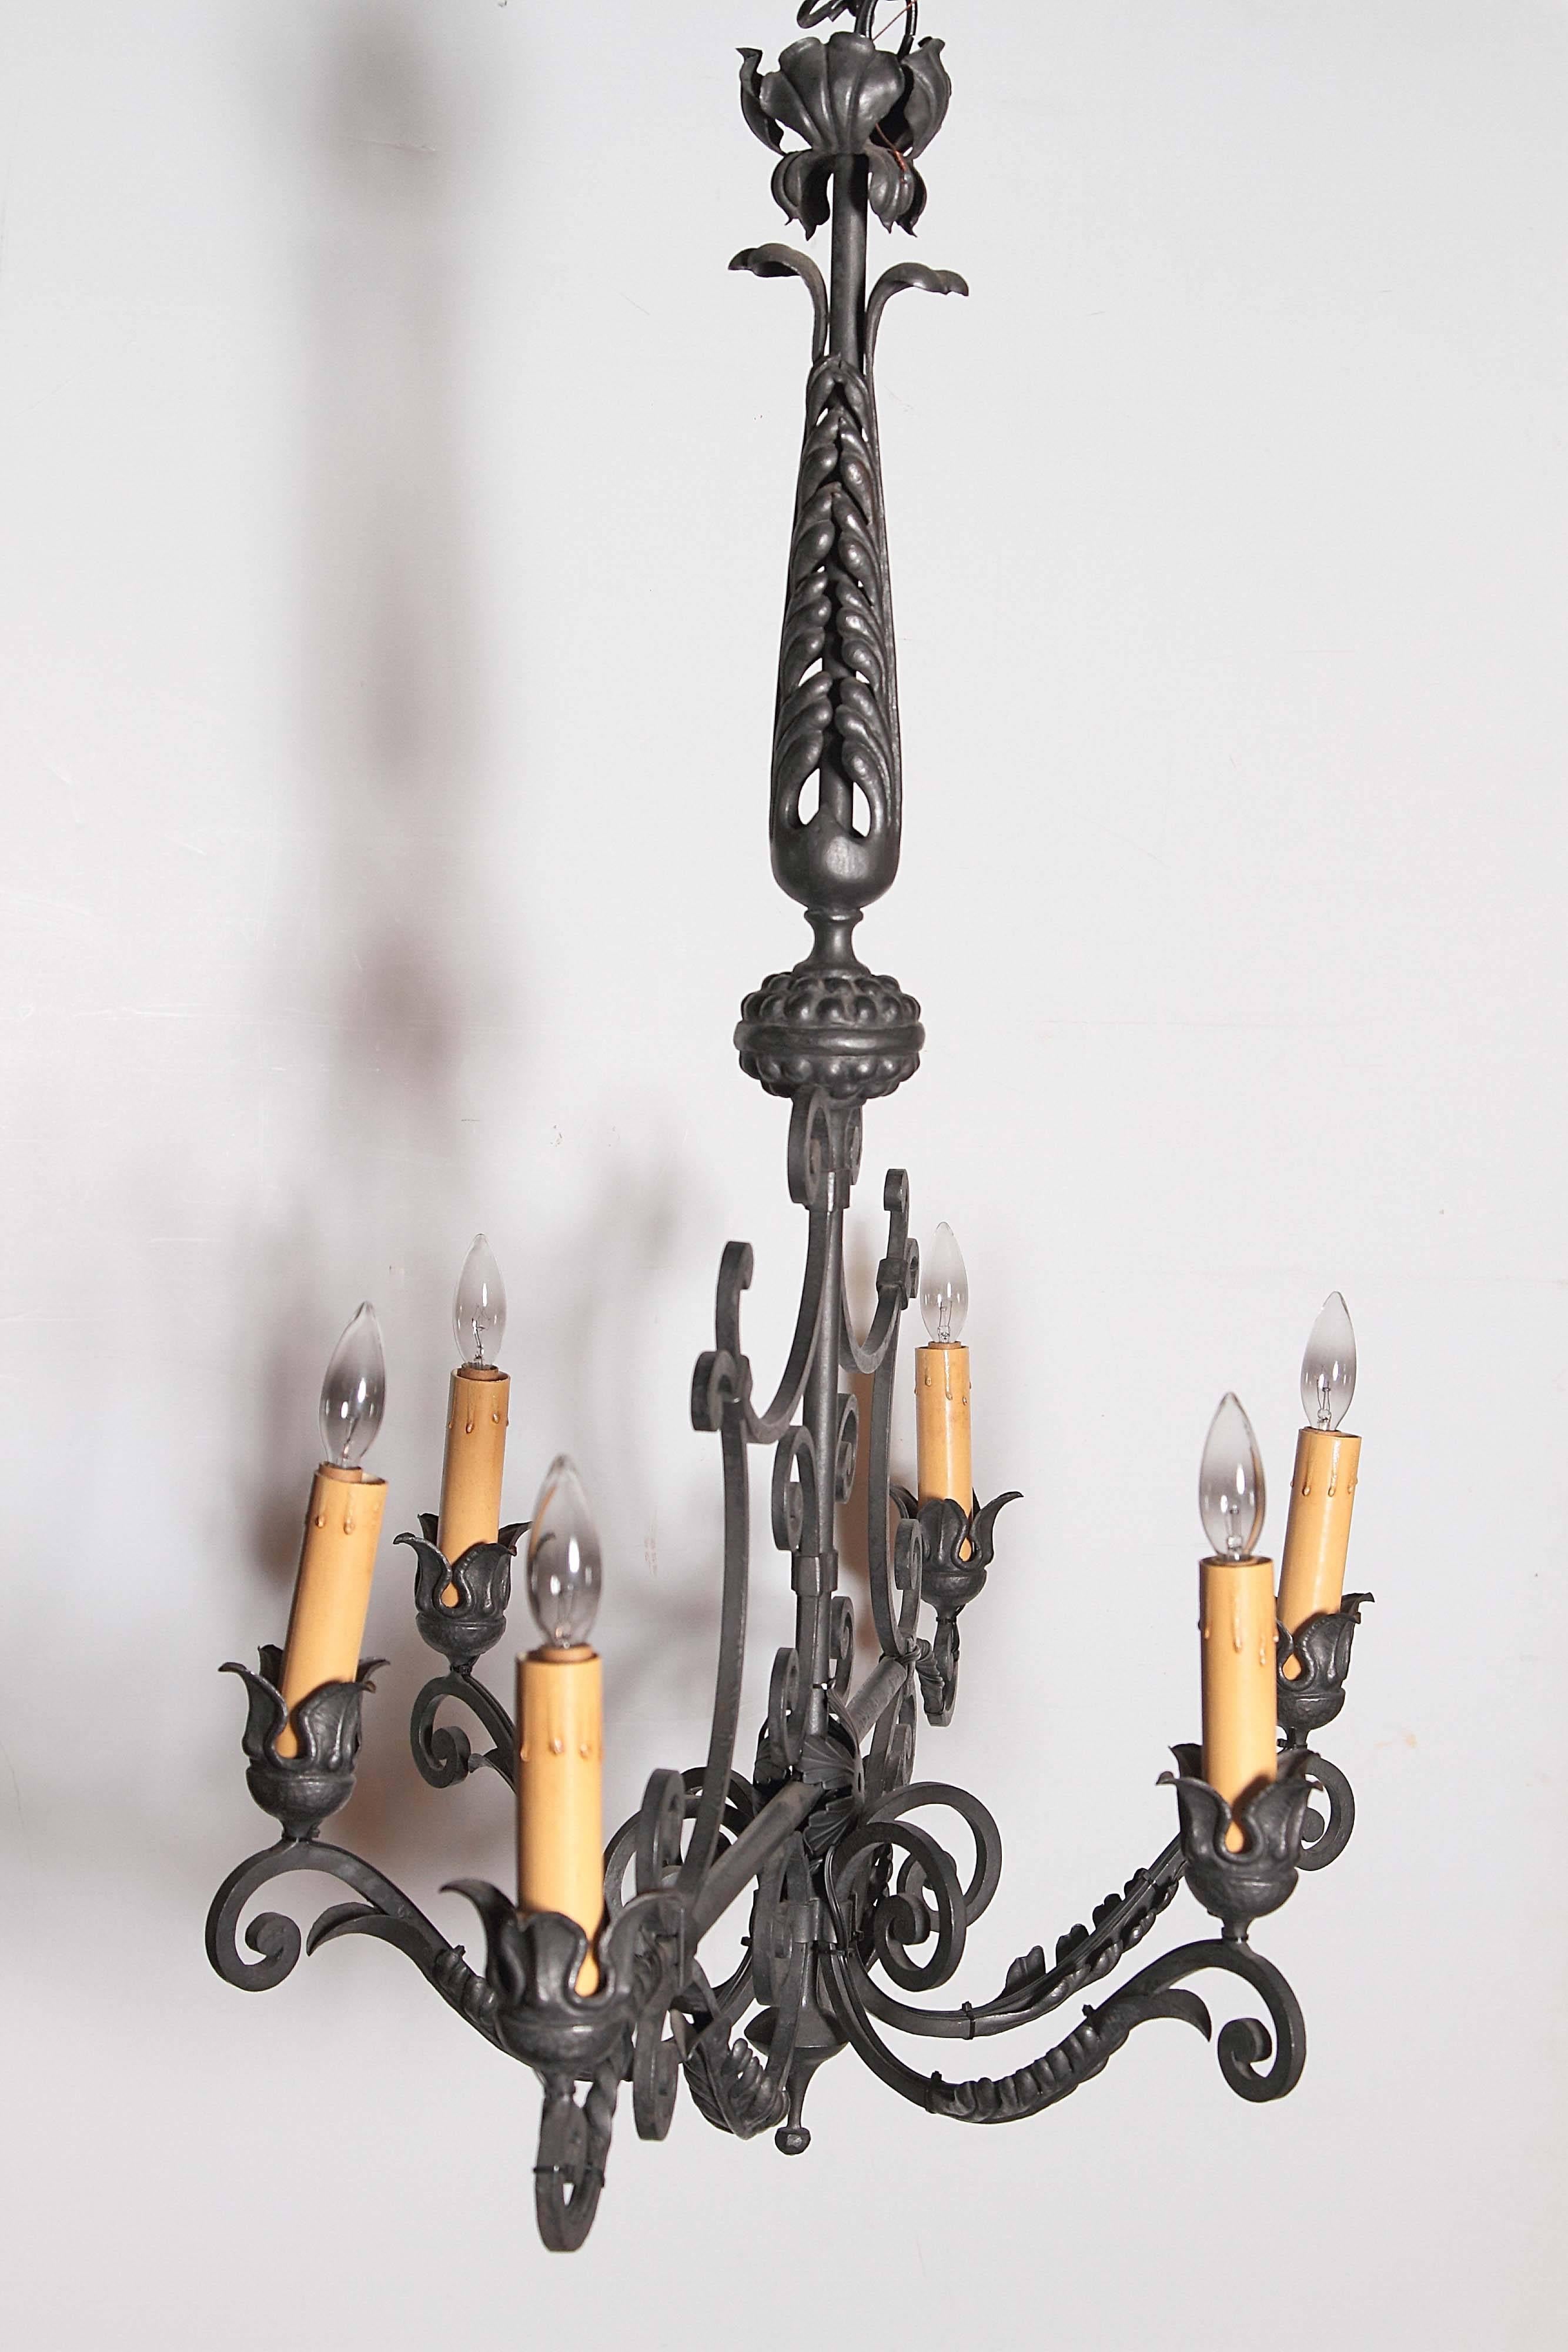 Long Mid-20th Century French Six-Light Iron Chandelier with Ornate Top 1